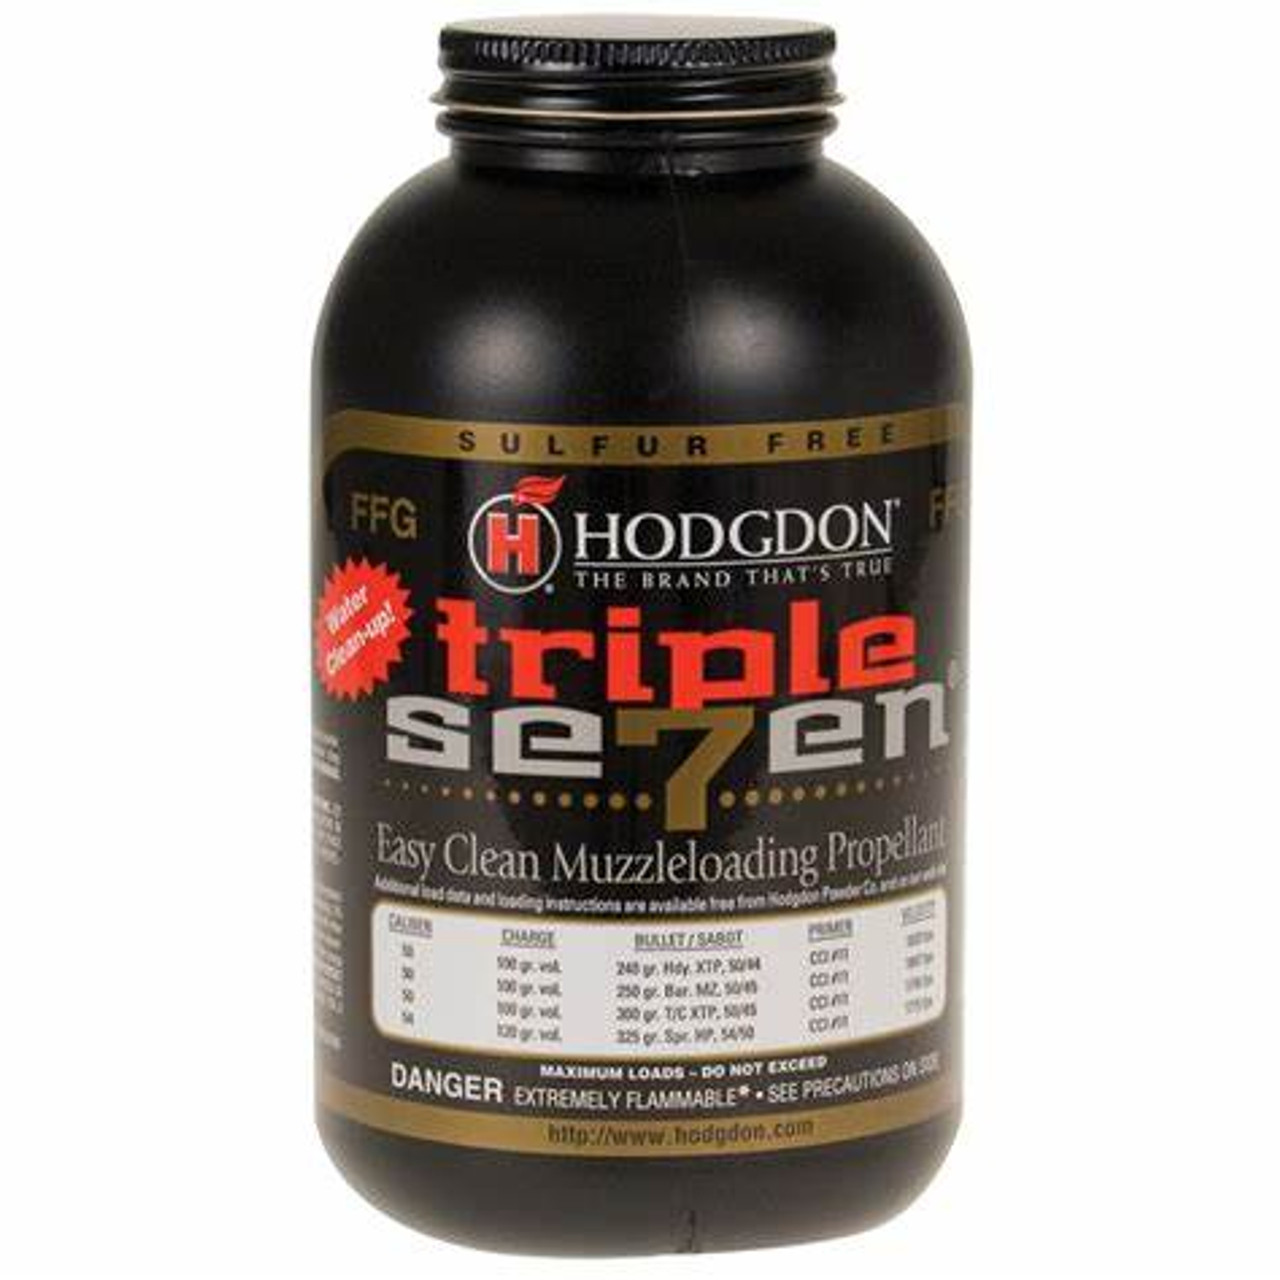 This Triple Seven FFG Black Powder from Hodgdon delivers the same premium-quality performance as the Pyrodex Pellet, so switching over to the powder is easy. The Triple Seven FFG powder delivers extremely high velocity to ensure flatter trajectories and greater accuracy.

Available in a convenient 1-pound tub, this Triple Seven FFFG Black Powder from Hodgdon delivers an impressive combination of easy loading, instant ignition, and quick cleanup. In addition to delivering excellent quality and performance, this powder has no odor and cleans up easily with plain tap water.

SPECIFICATIONS
Powder Type
Muzzleloader
CA Prop 65
1
Powder Size
1 lb
Brand
Hodgdon Powder